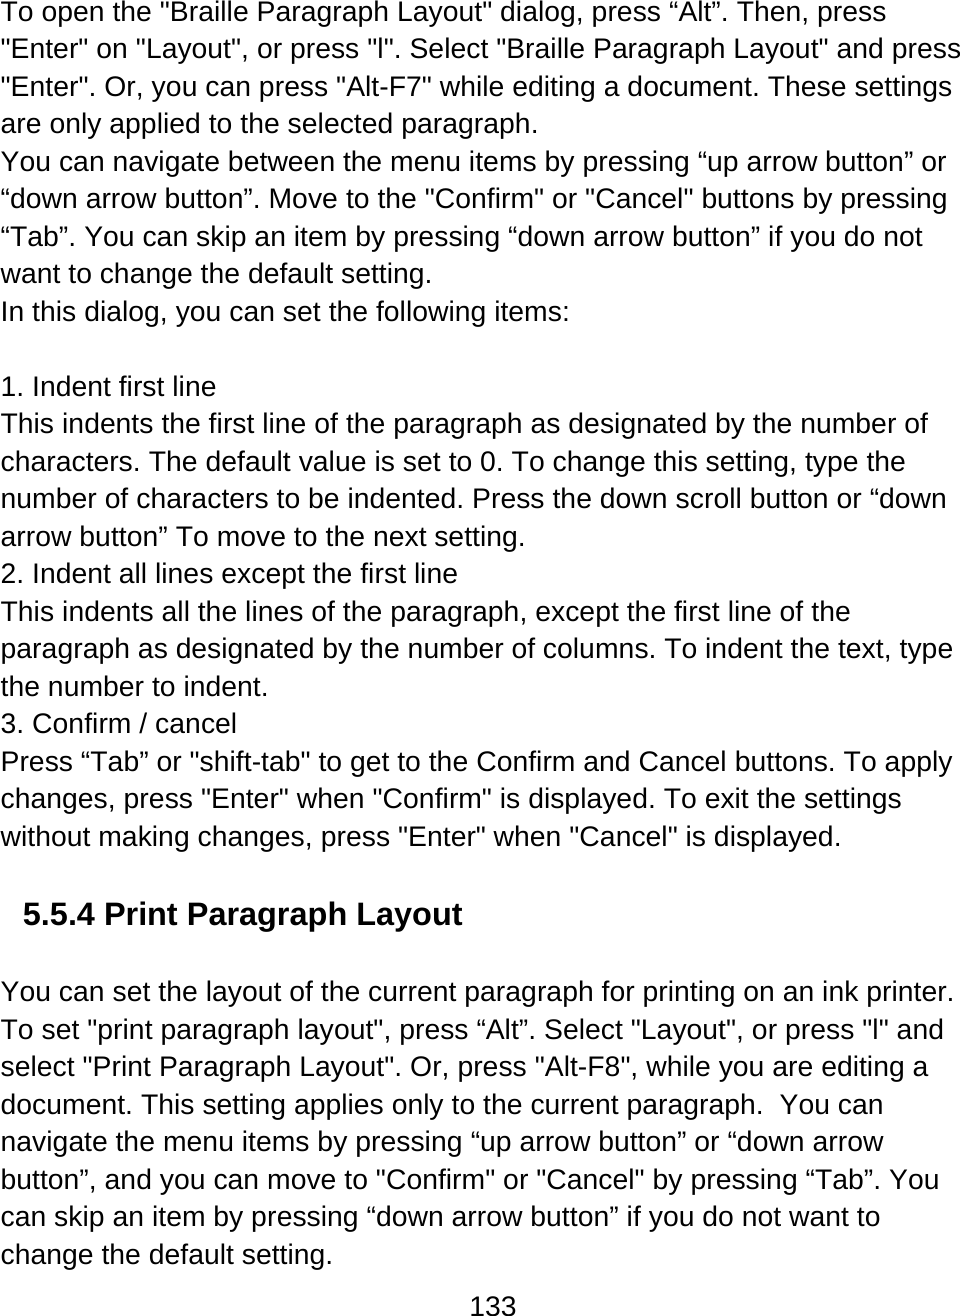 133  To open the &quot;Braille Paragraph Layout&quot; dialog, press “Alt”. Then, press &quot;Enter&quot; on &quot;Layout&quot;, or press &quot;l&quot;. Select &quot;Braille Paragraph Layout&quot; and press &quot;Enter&quot;. Or, you can press &quot;Alt-F7&quot; while editing a document. These settings are only applied to the selected paragraph.  You can navigate between the menu items by pressing “up arrow button” or “down arrow button”. Move to the &quot;Confirm&quot; or &quot;Cancel&quot; buttons by pressing “Tab”. You can skip an item by pressing “down arrow button” if you do not want to change the default setting. In this dialog, you can set the following items:   1. Indent first line This indents the first line of the paragraph as designated by the number of characters. The default value is set to 0. To change this setting, type the number of characters to be indented. Press the down scroll button or “down arrow button” To move to the next setting.  2. Indent all lines except the first line This indents all the lines of the paragraph, except the first line of the paragraph as designated by the number of columns. To indent the text, type the number to indent.  3. Confirm / cancel Press “Tab” or &quot;shift-tab&quot; to get to the Confirm and Cancel buttons. To apply changes, press &quot;Enter&quot; when &quot;Confirm&quot; is displayed. To exit the settings without making changes, press &quot;Enter&quot; when &quot;Cancel&quot; is displayed.   5.5.4 Print Paragraph Layout   You can set the layout of the current paragraph for printing on an ink printer. To set &quot;print paragraph layout&quot;, press “Alt”. Select &quot;Layout&quot;, or press &quot;l&quot; and select &quot;Print Paragraph Layout&quot;. Or, press &quot;Alt-F8&quot;, while you are editing a document. This setting applies only to the current paragraph.  You can navigate the menu items by pressing “up arrow button” or “down arrow button”, and you can move to &quot;Confirm&quot; or &quot;Cancel&quot; by pressing “Tab”. You can skip an item by pressing “down arrow button” if you do not want to change the default setting. 